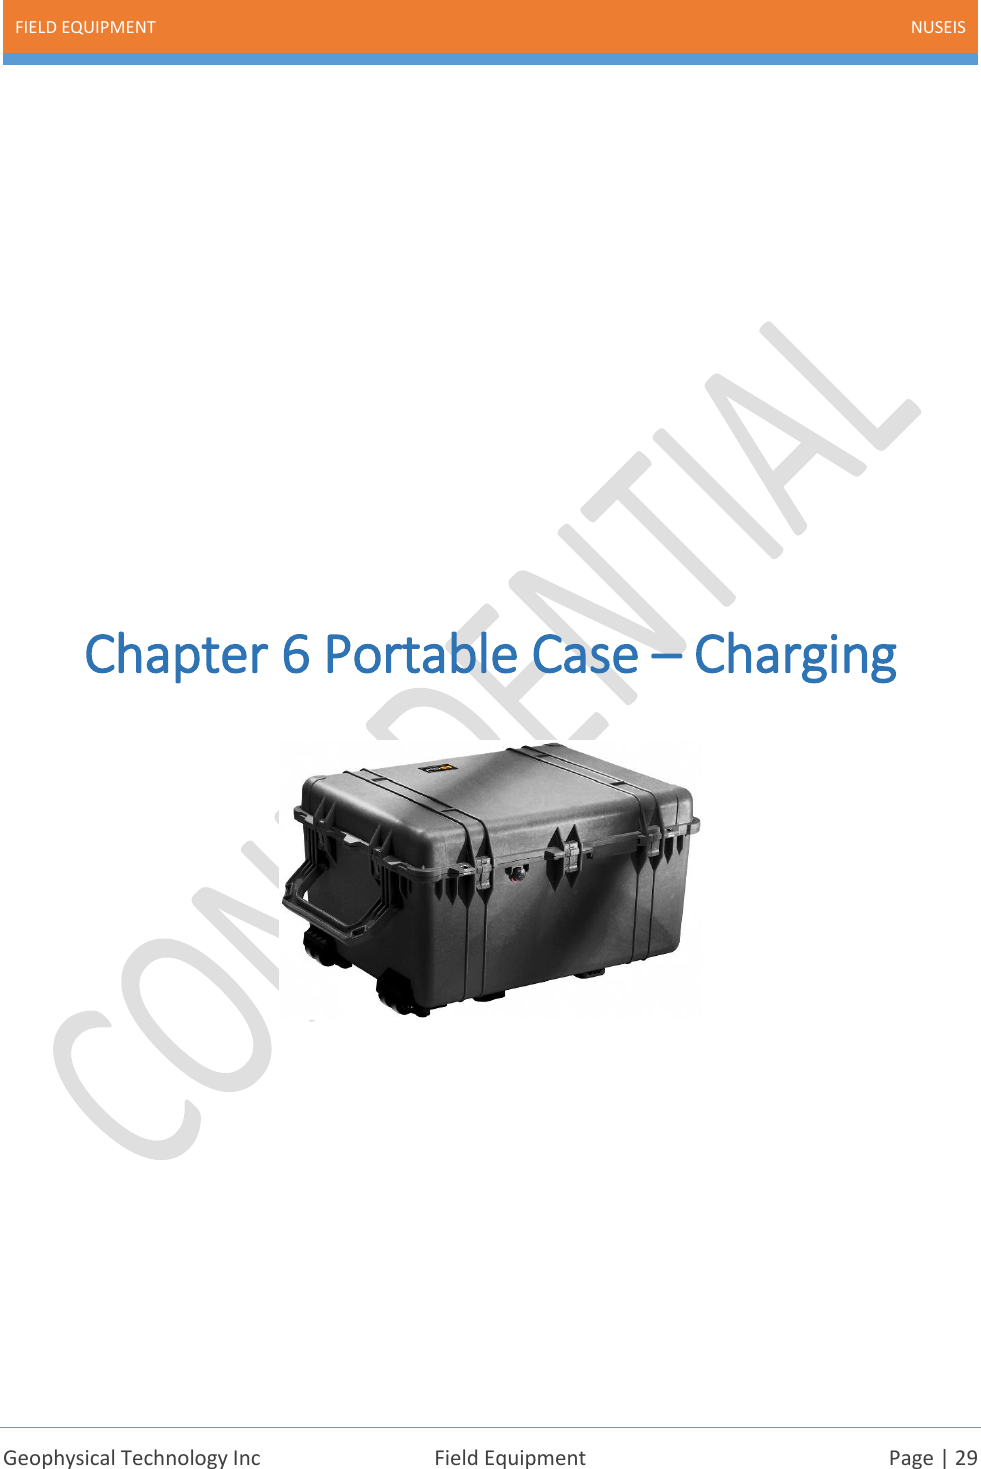 FIELD EQUIPMENT NUSEIS    Geophysical Technology Inc  Field Equipment  Page | 29             Chapter 6 Portable Case – Charging          